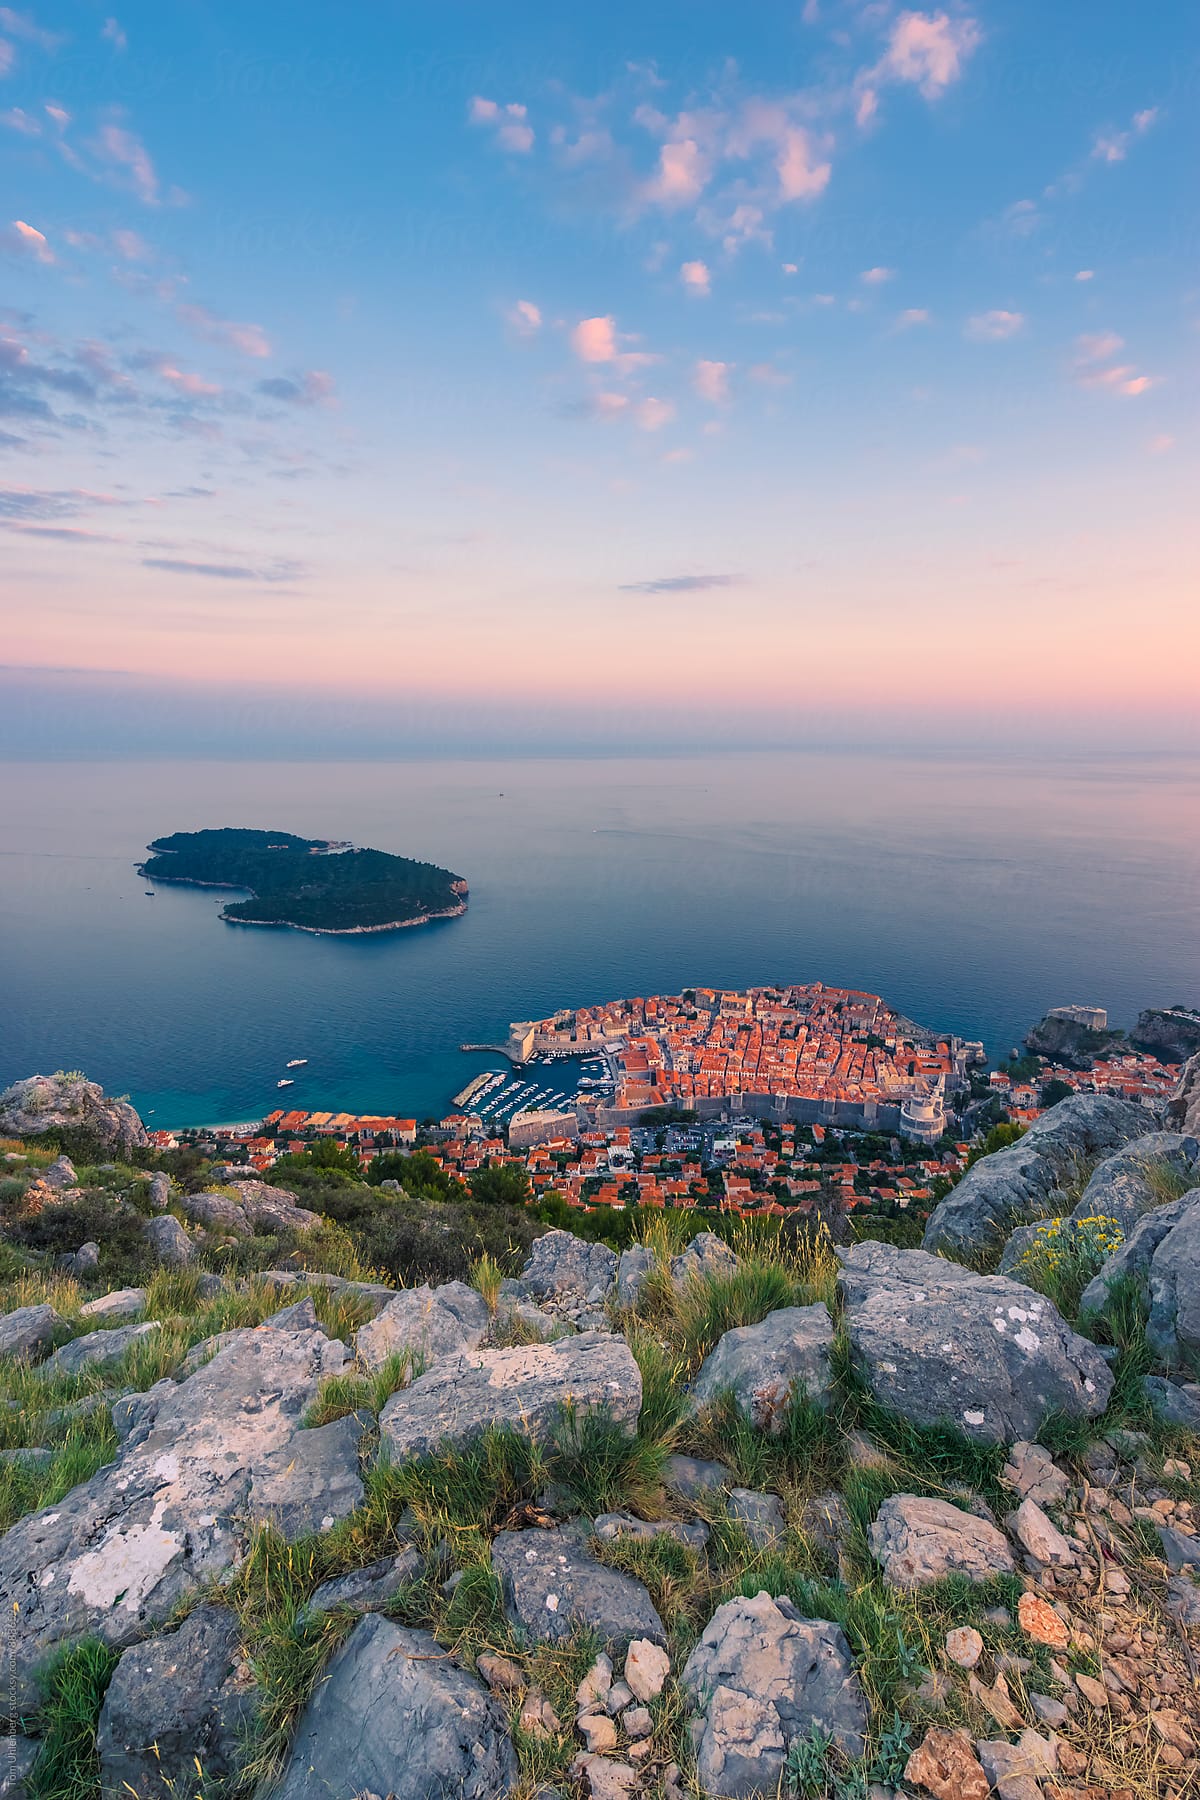 Dubrovnik, Croatia - Elevated View of the Old Town and the Island of Lokrum in Sunset Light